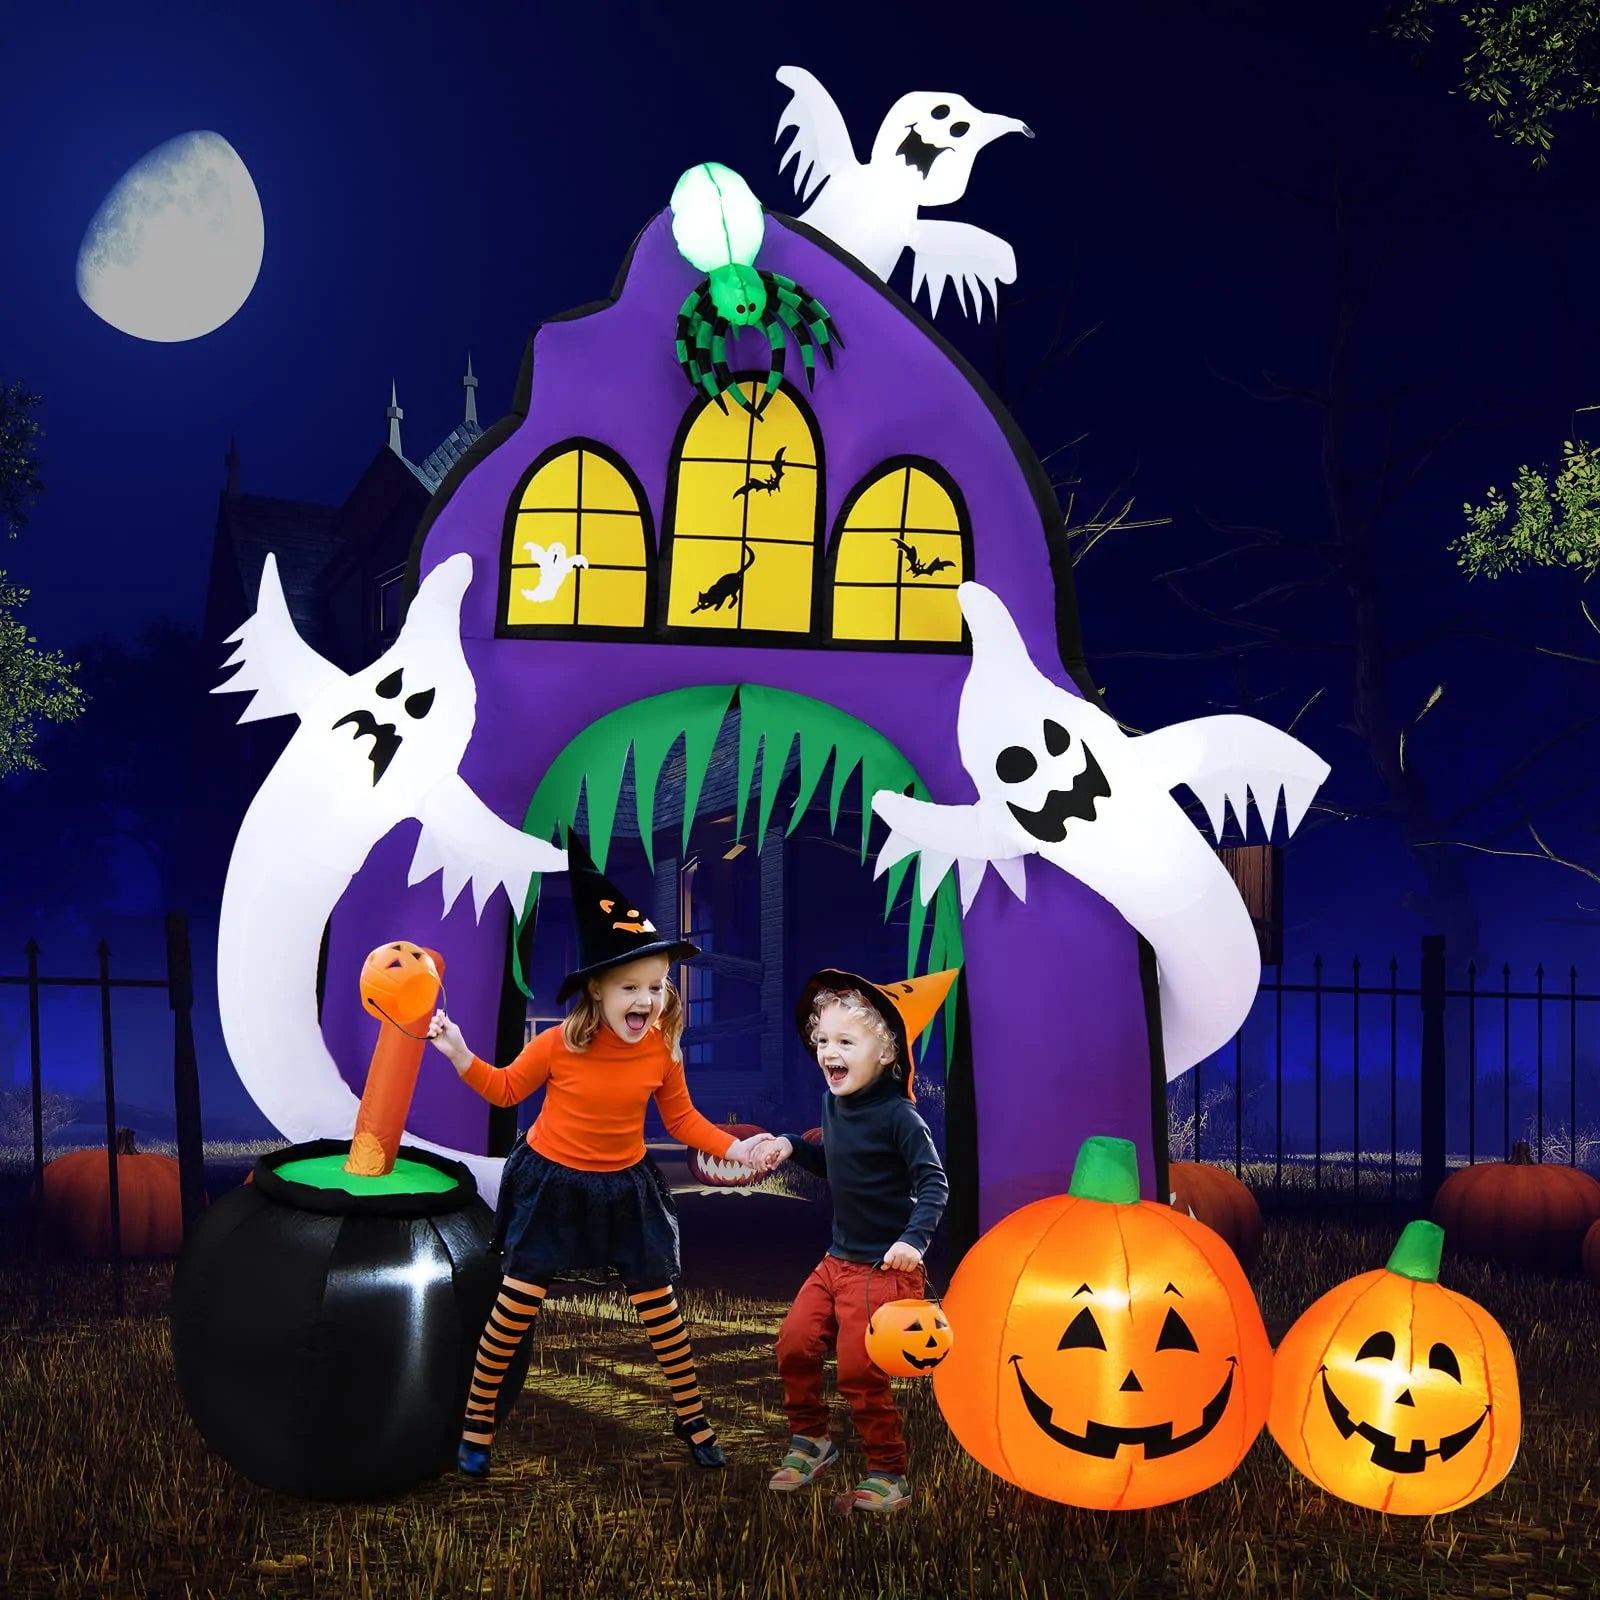 Halloween decorations for patio, yards, and garden